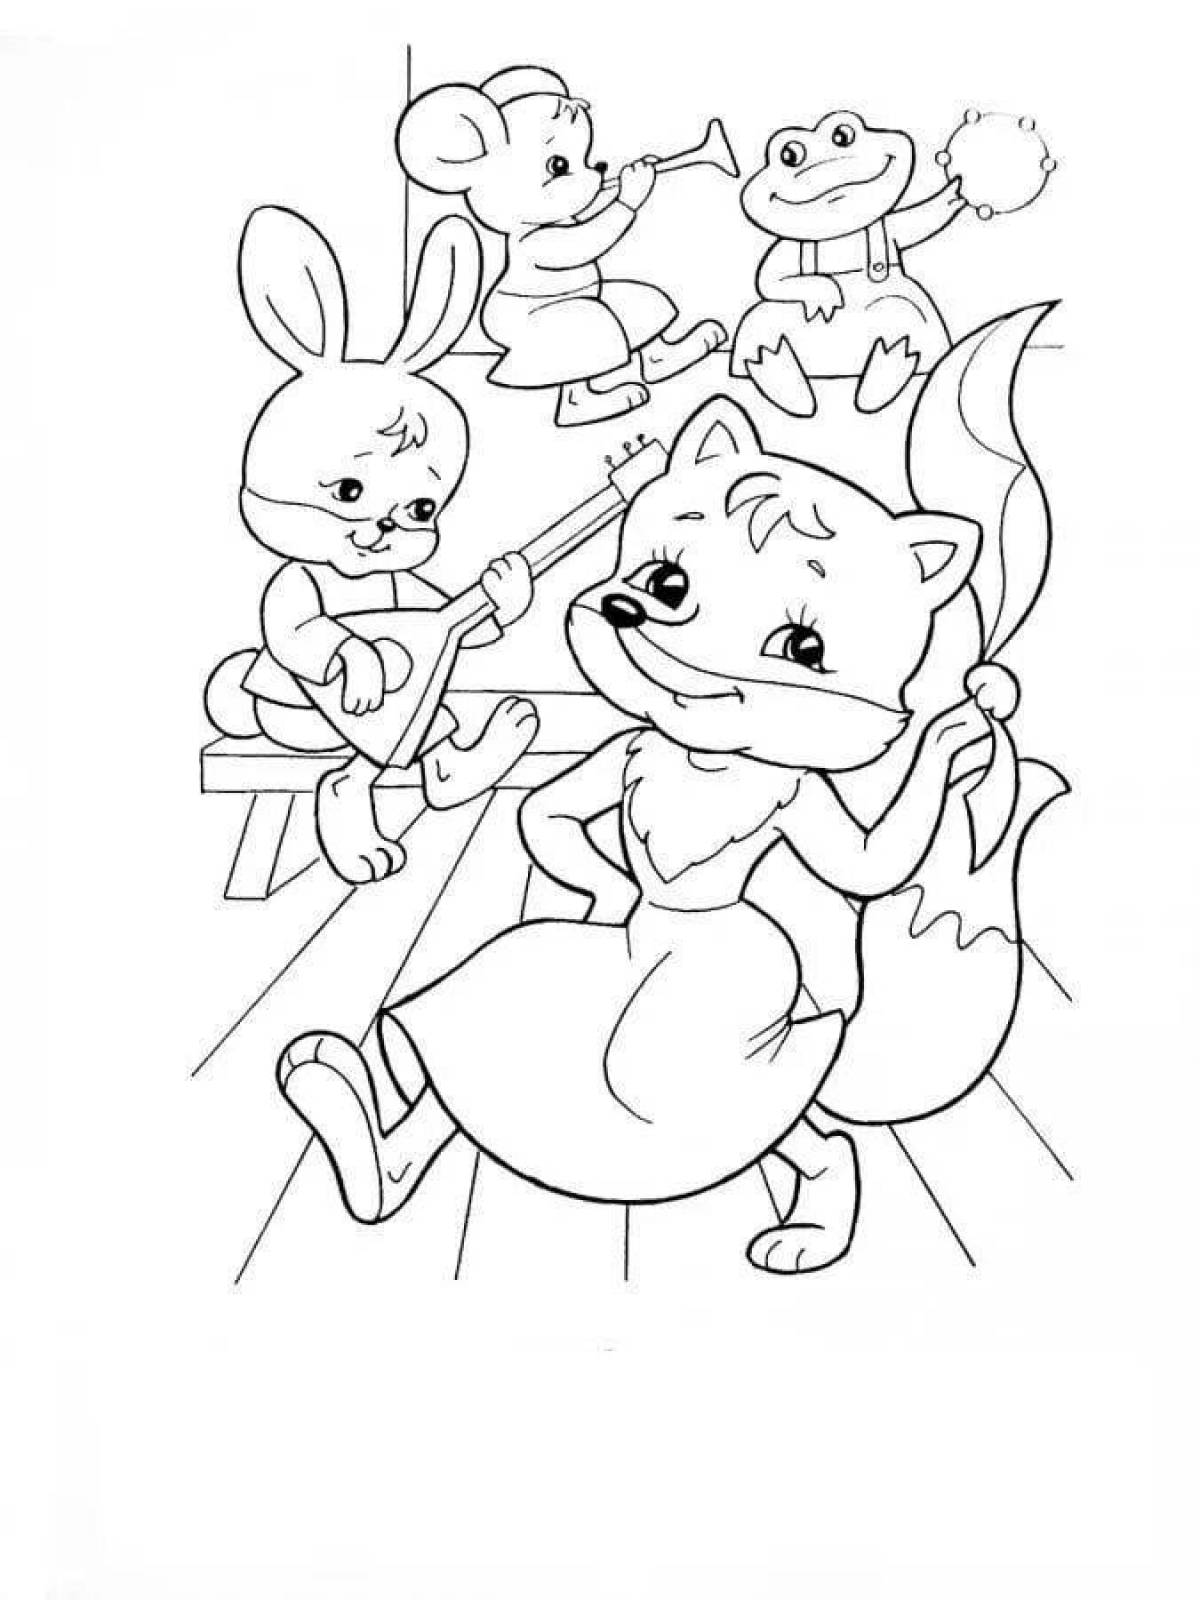 Charming house coloring book for the little ones